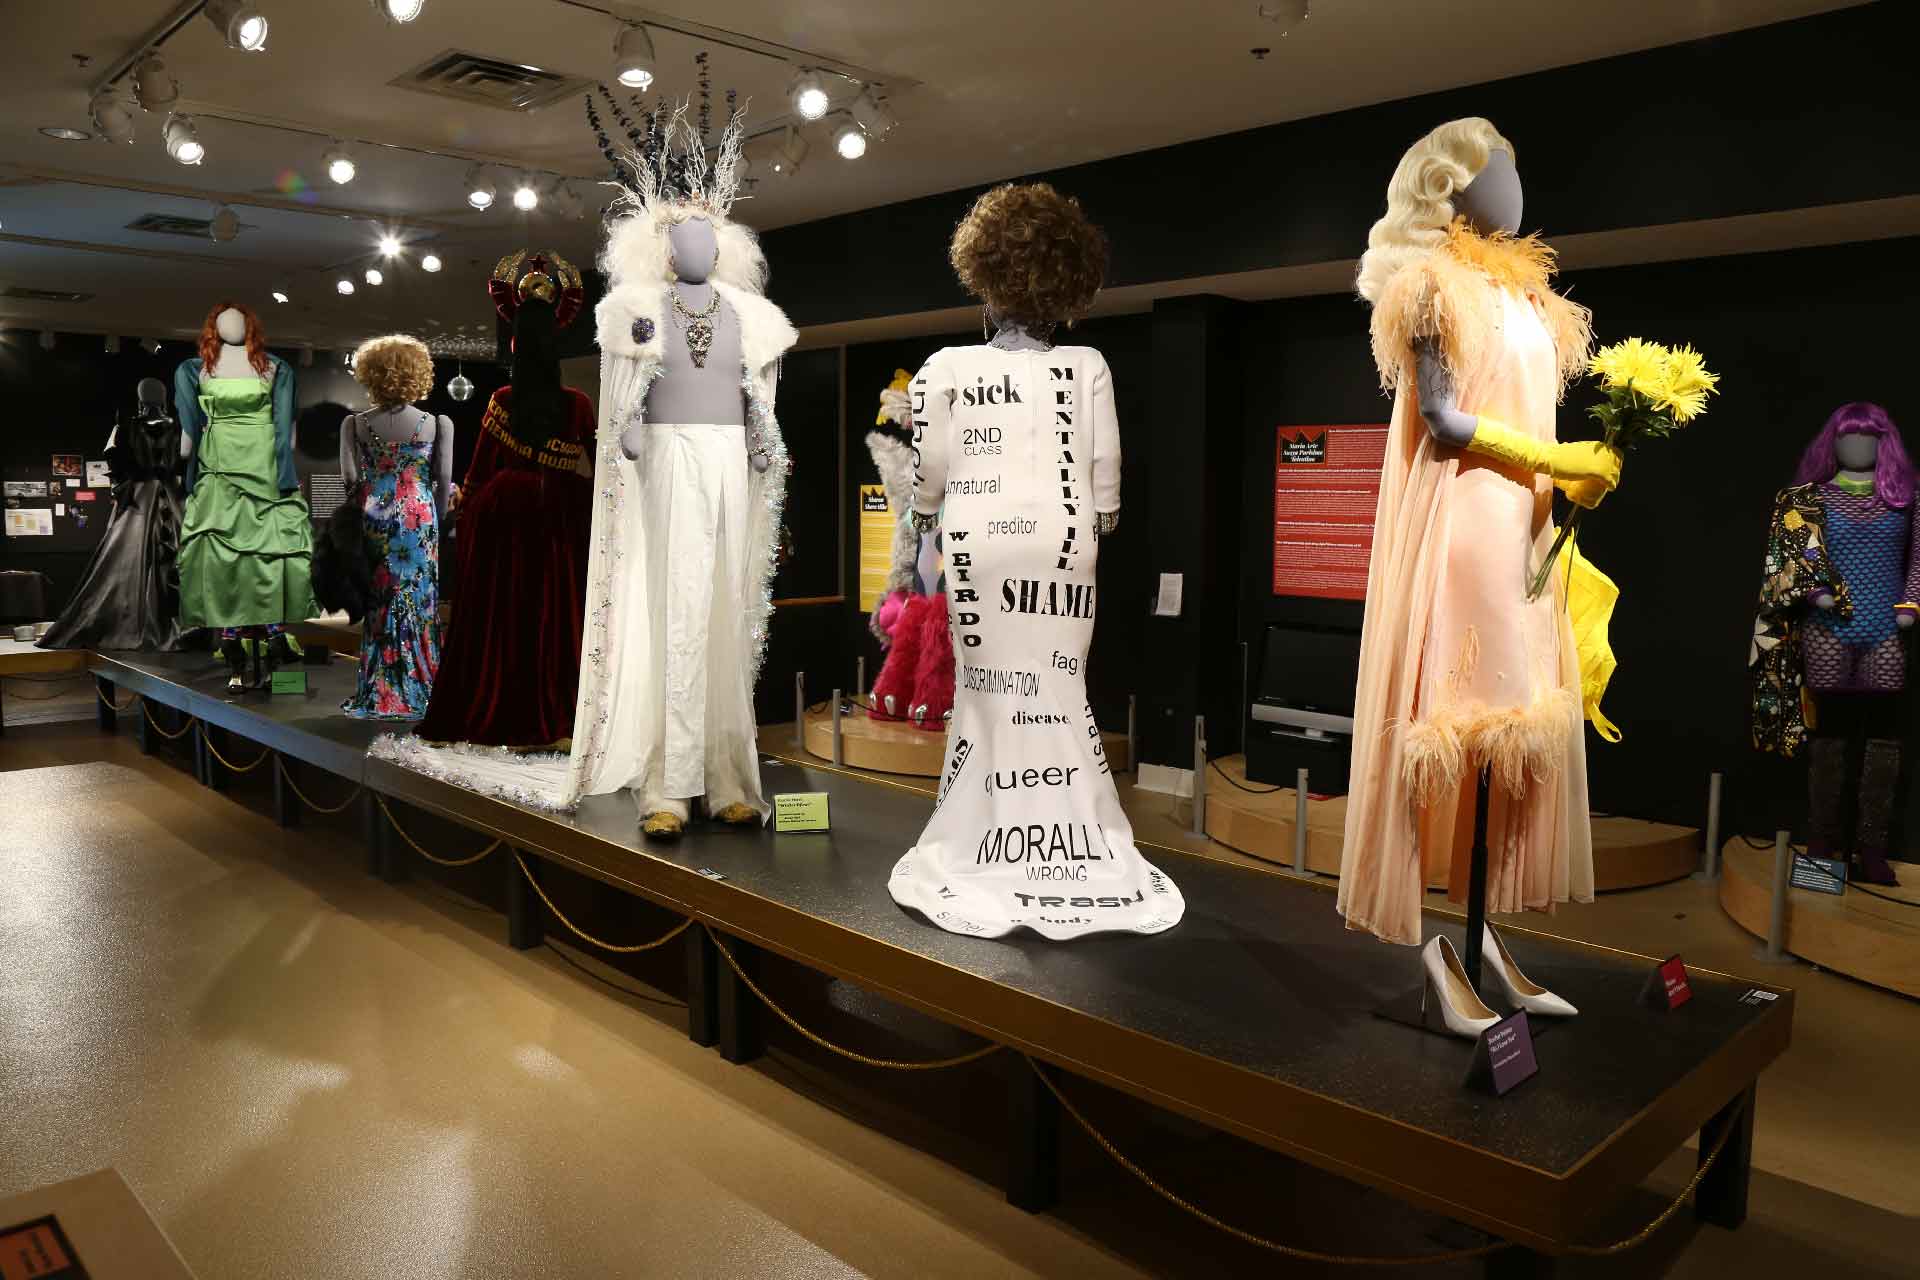 back view of exhibit featuring mannequin in pink drag costume in the front